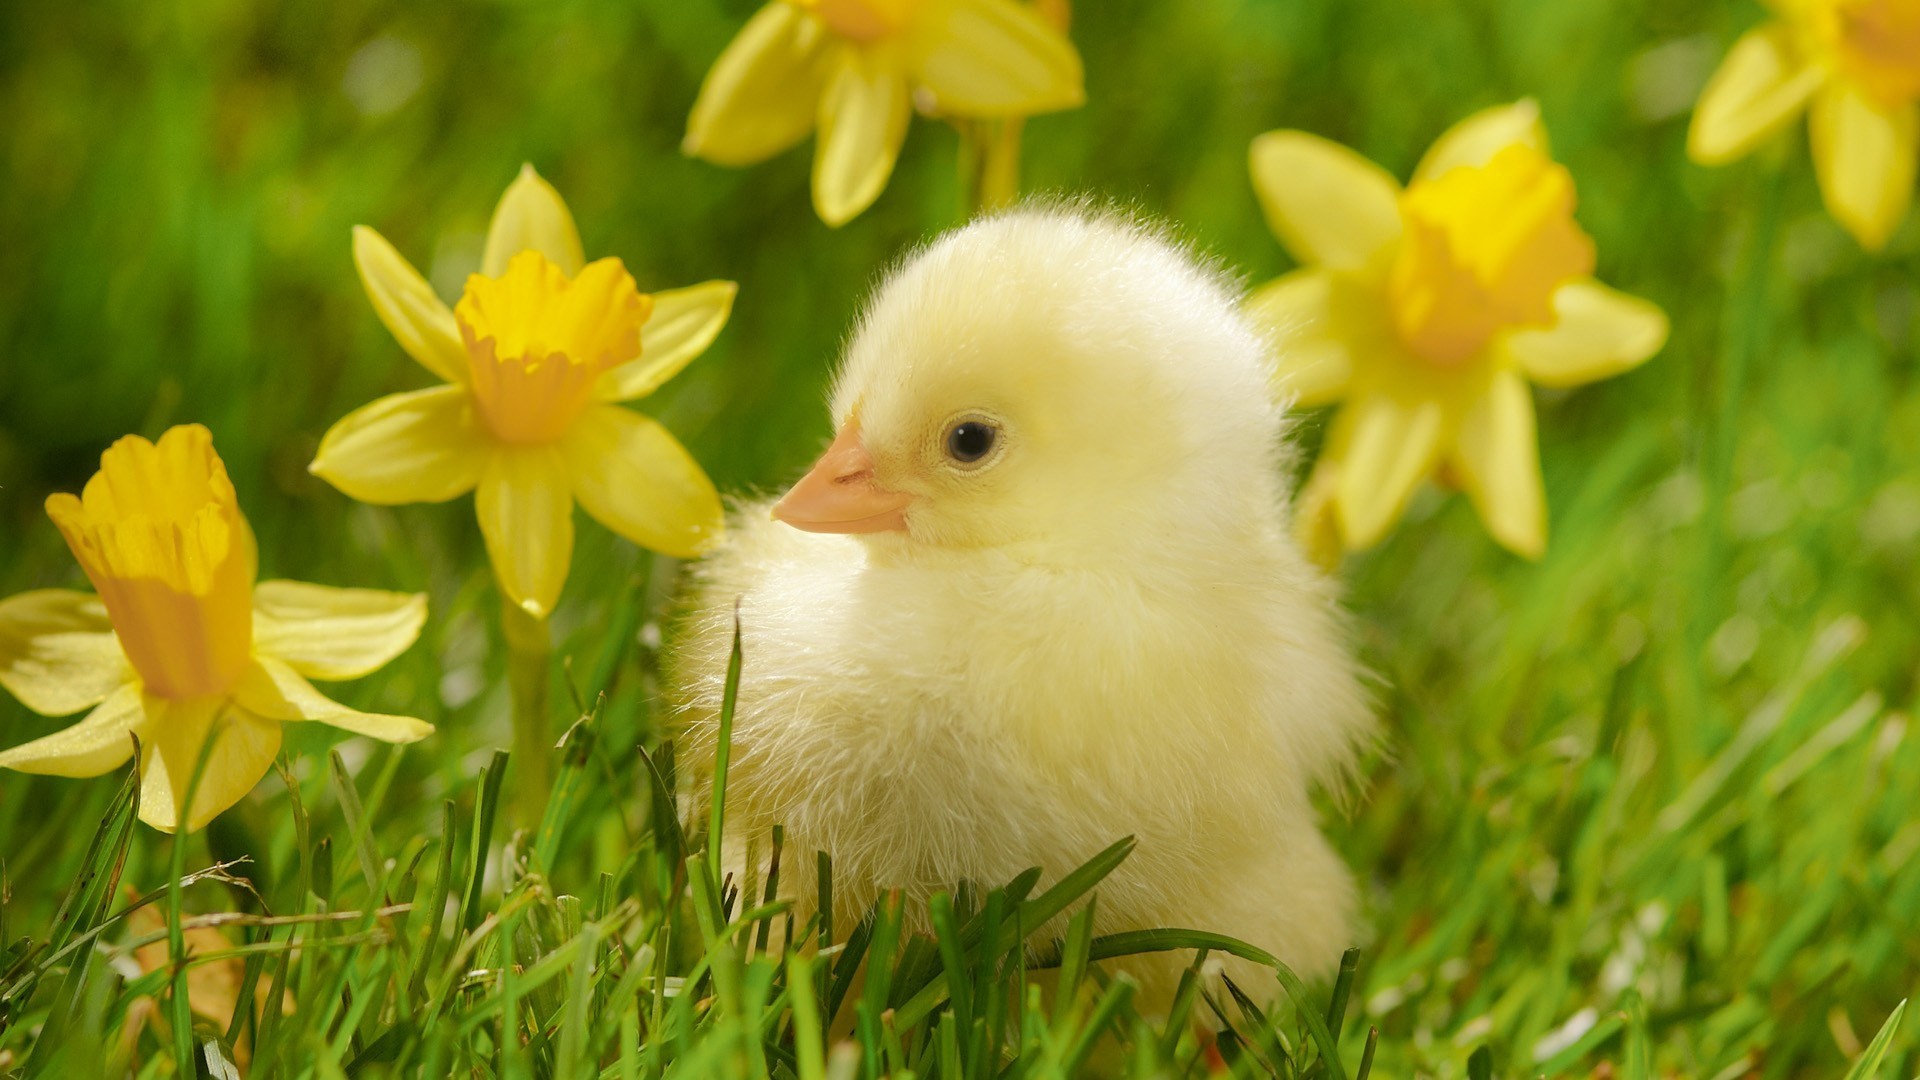 HD Cute Spring Backgrounds Resolution 1920x1080